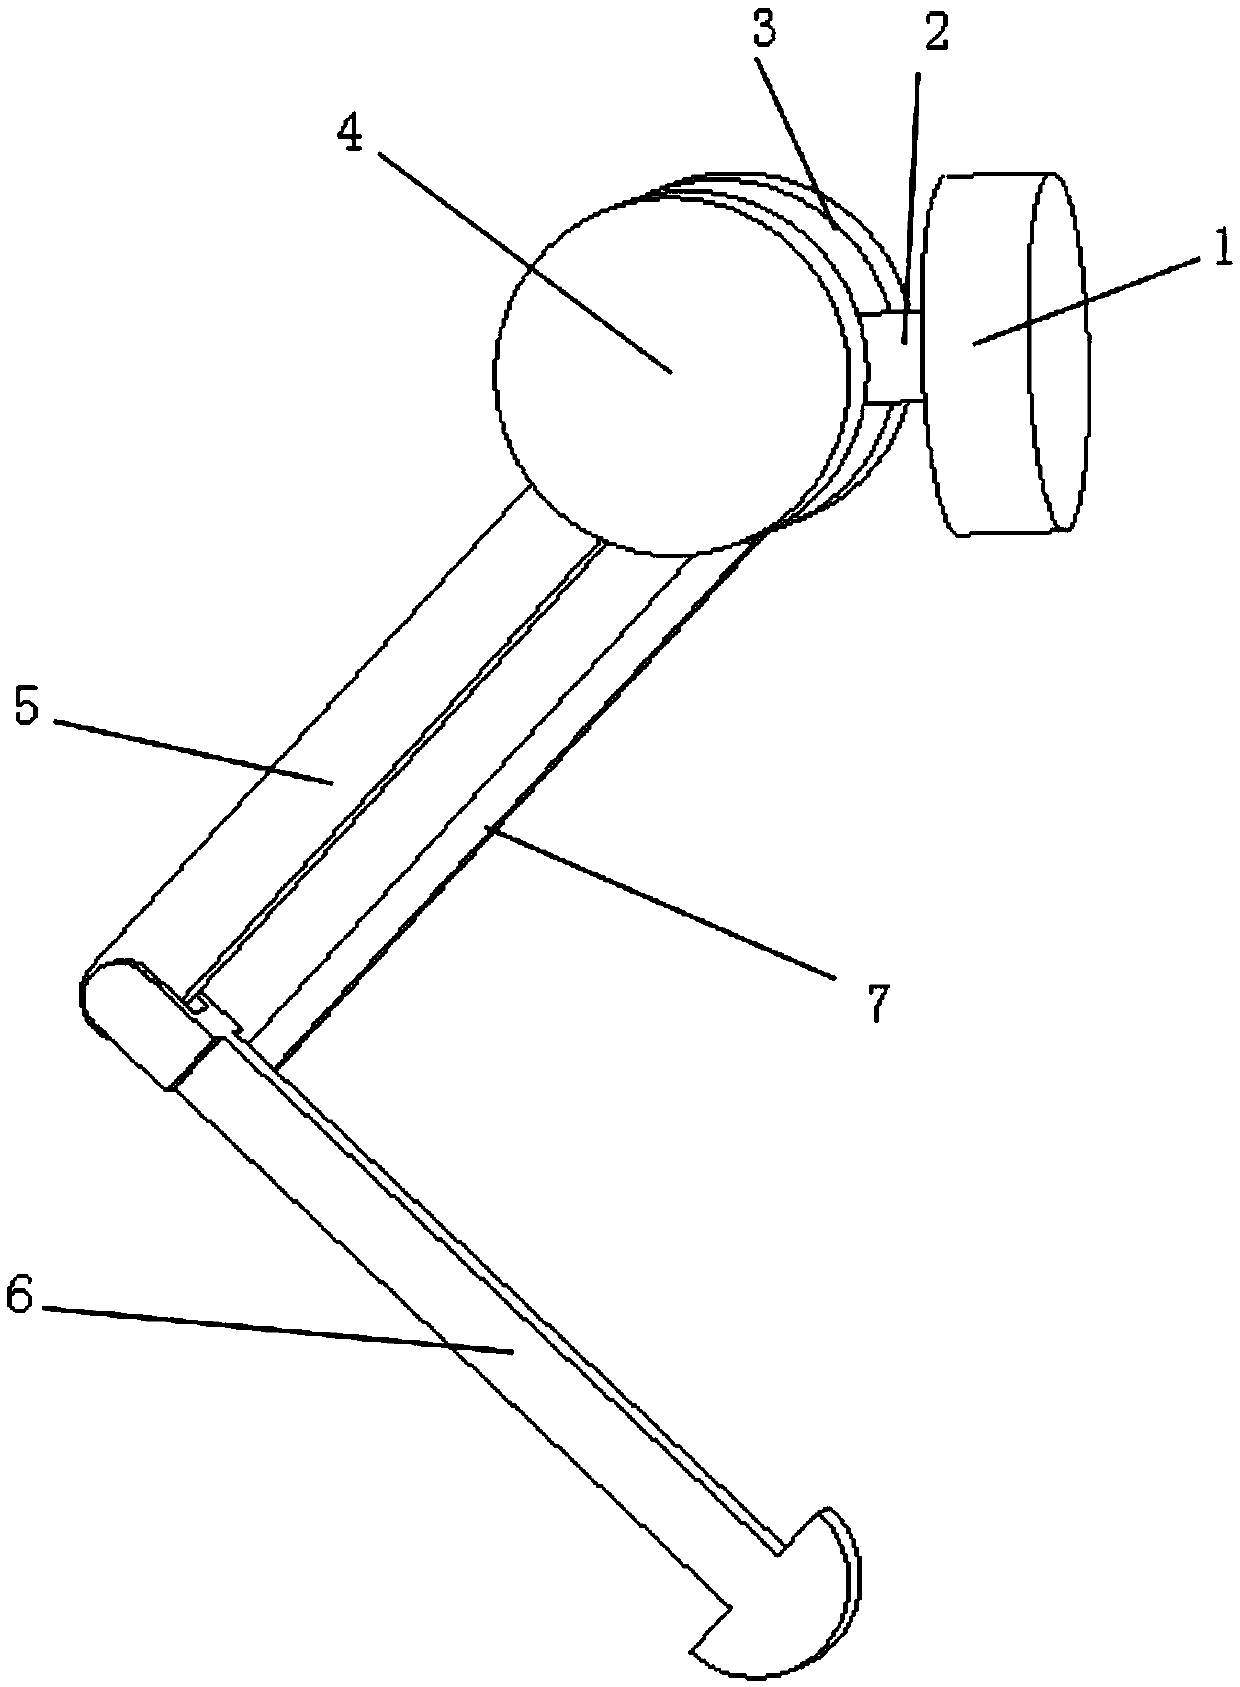 Simple three-DOF (degree of freedom) small-inertia bionic leg driven by hydraulic motors and applied to armed robot